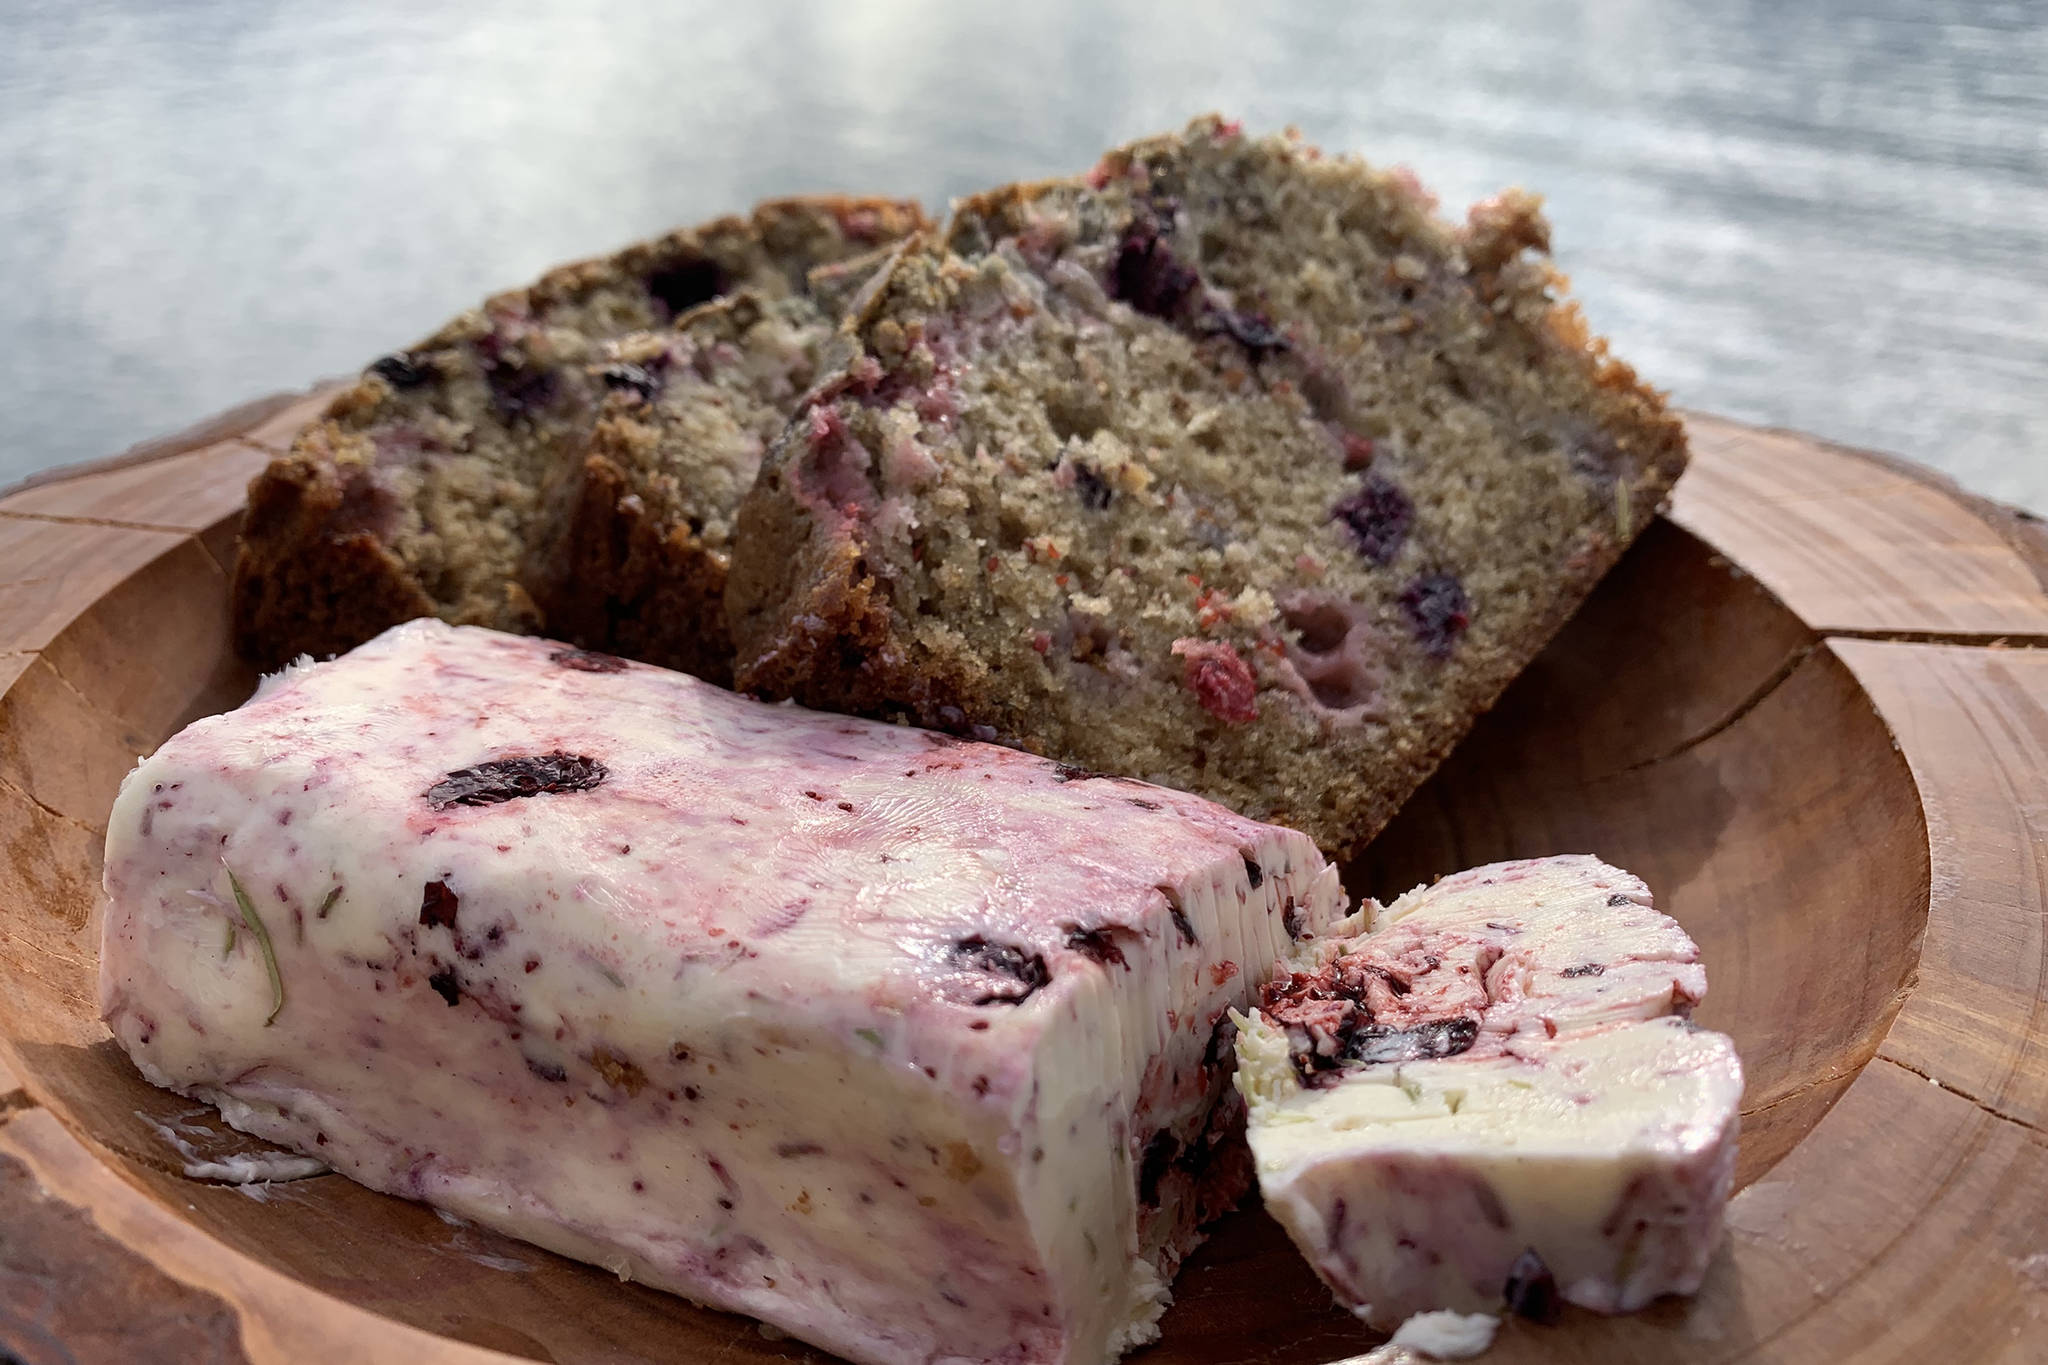 Homemade blueberry butter and berry bread are possible uses for Alaska blueberries.